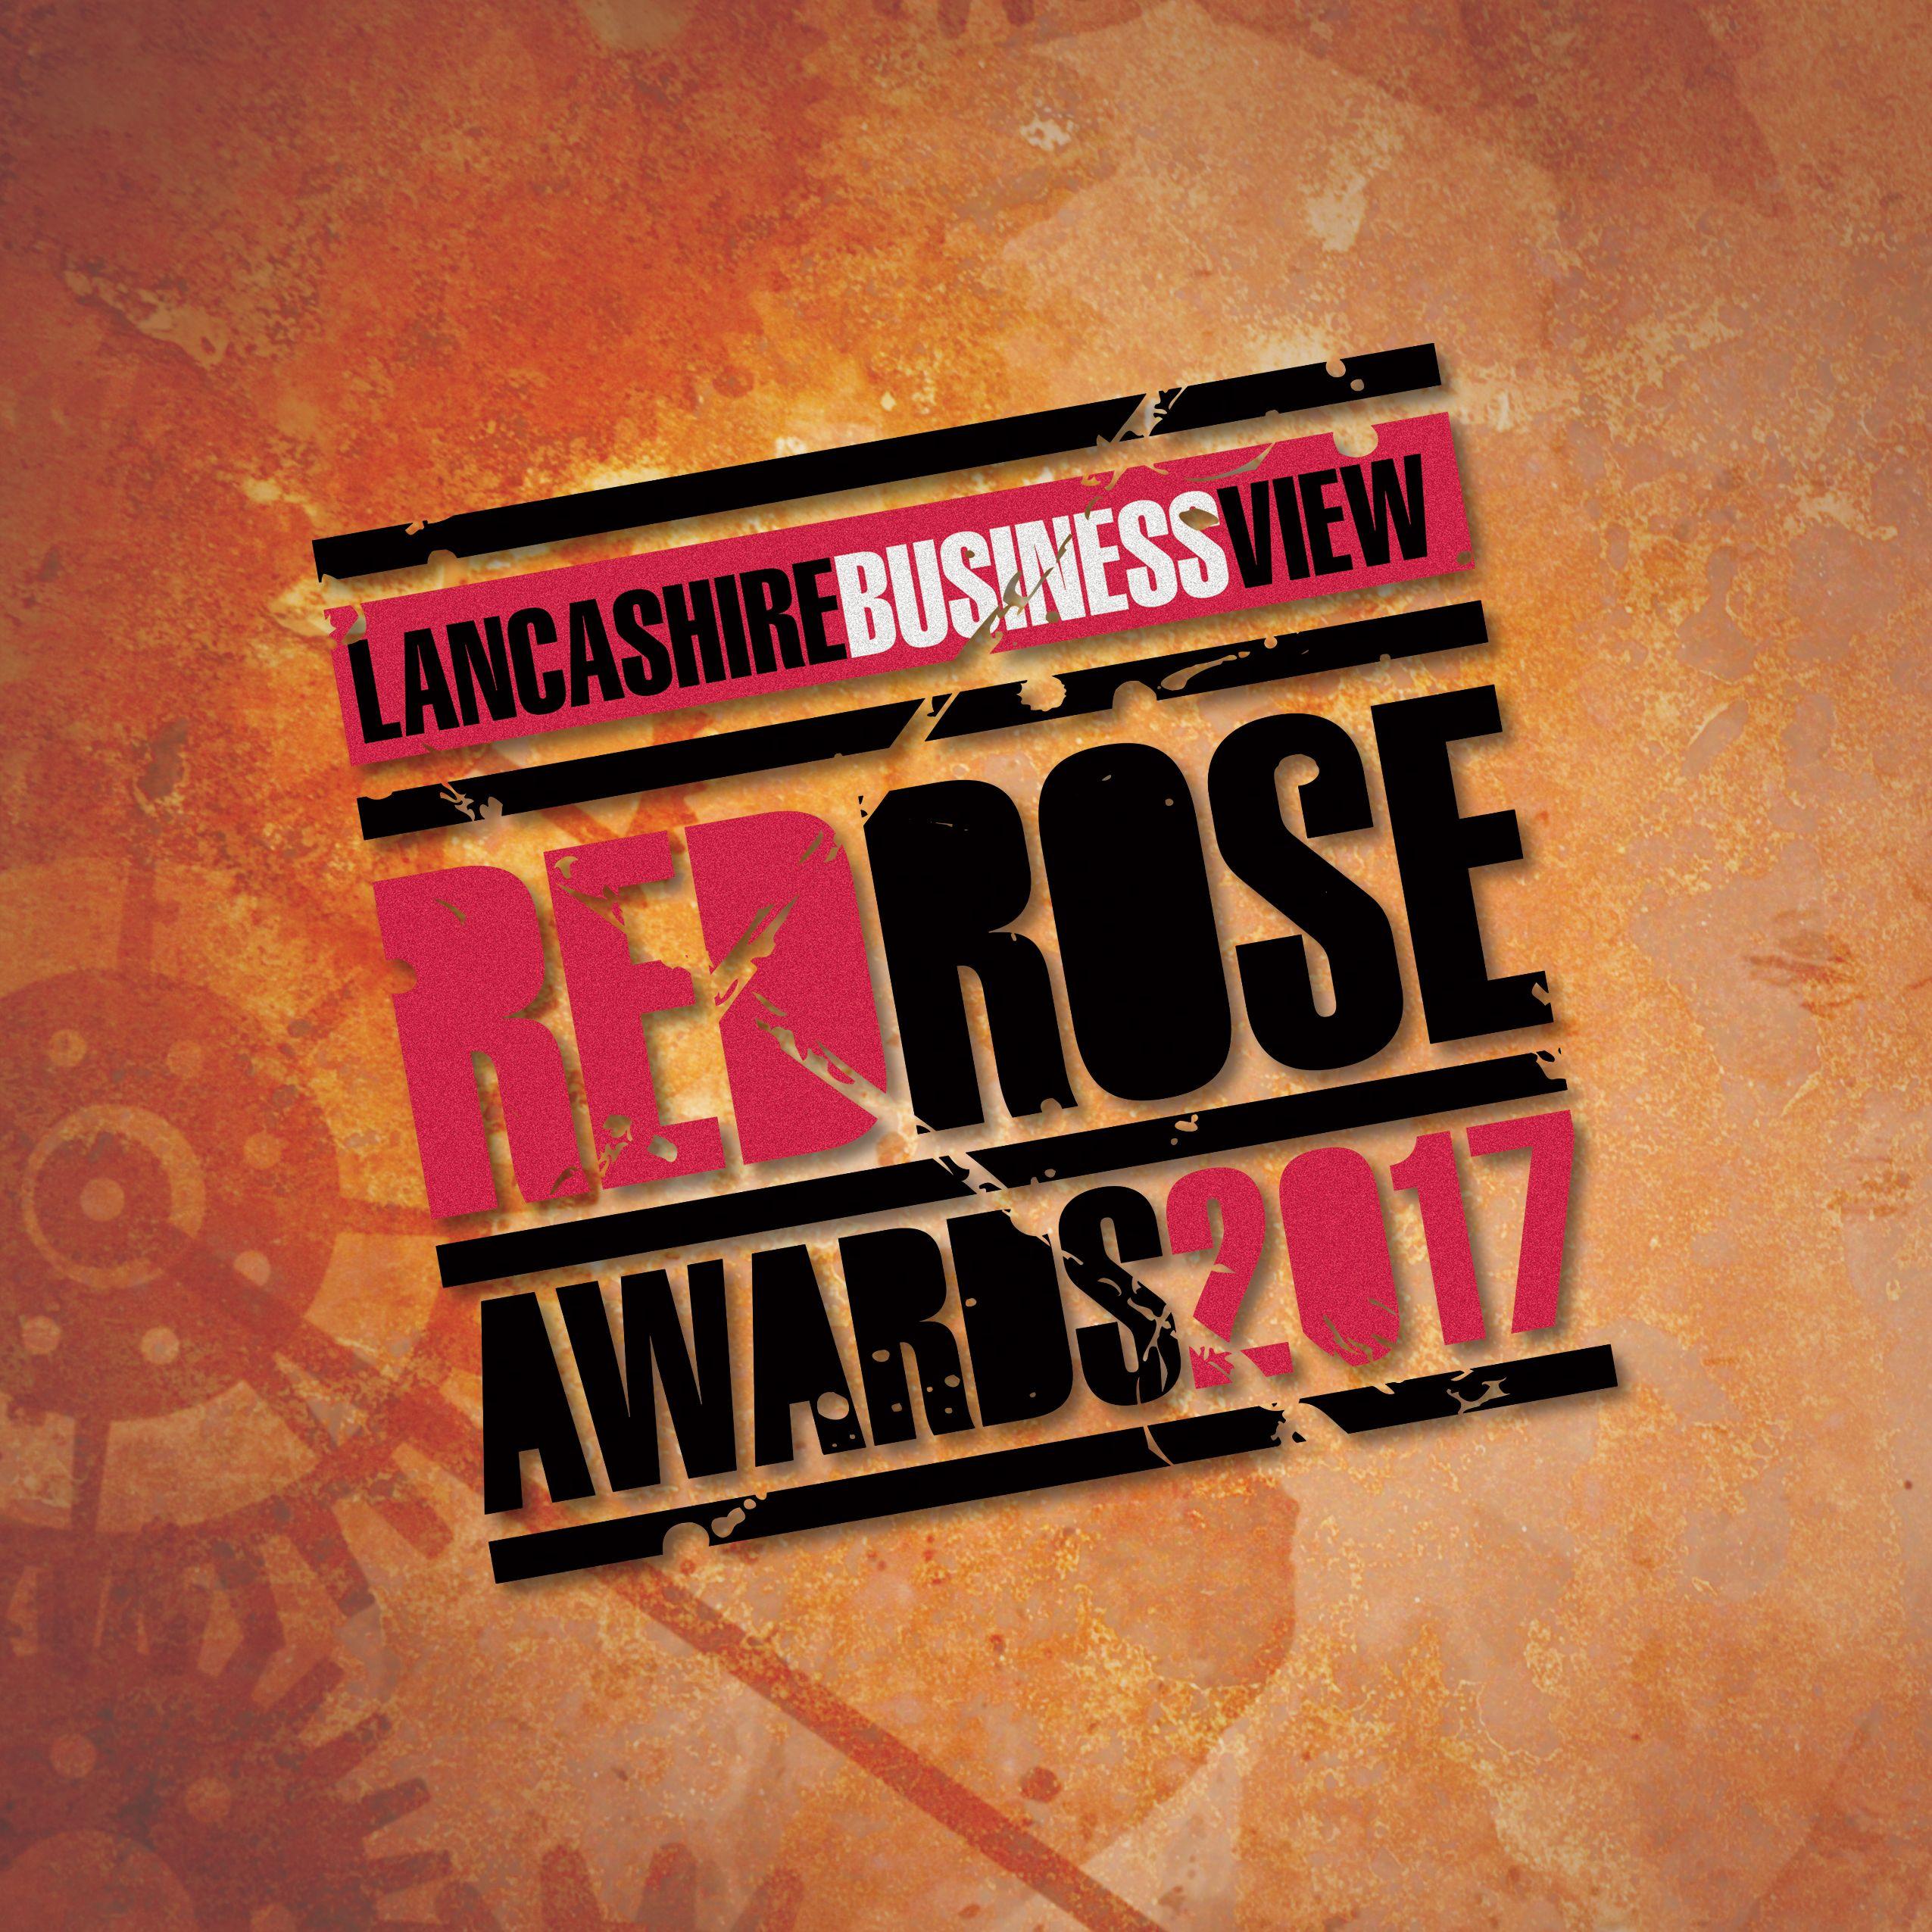 Red Award Logo - Red Rose Awards 2017 launched! Business View